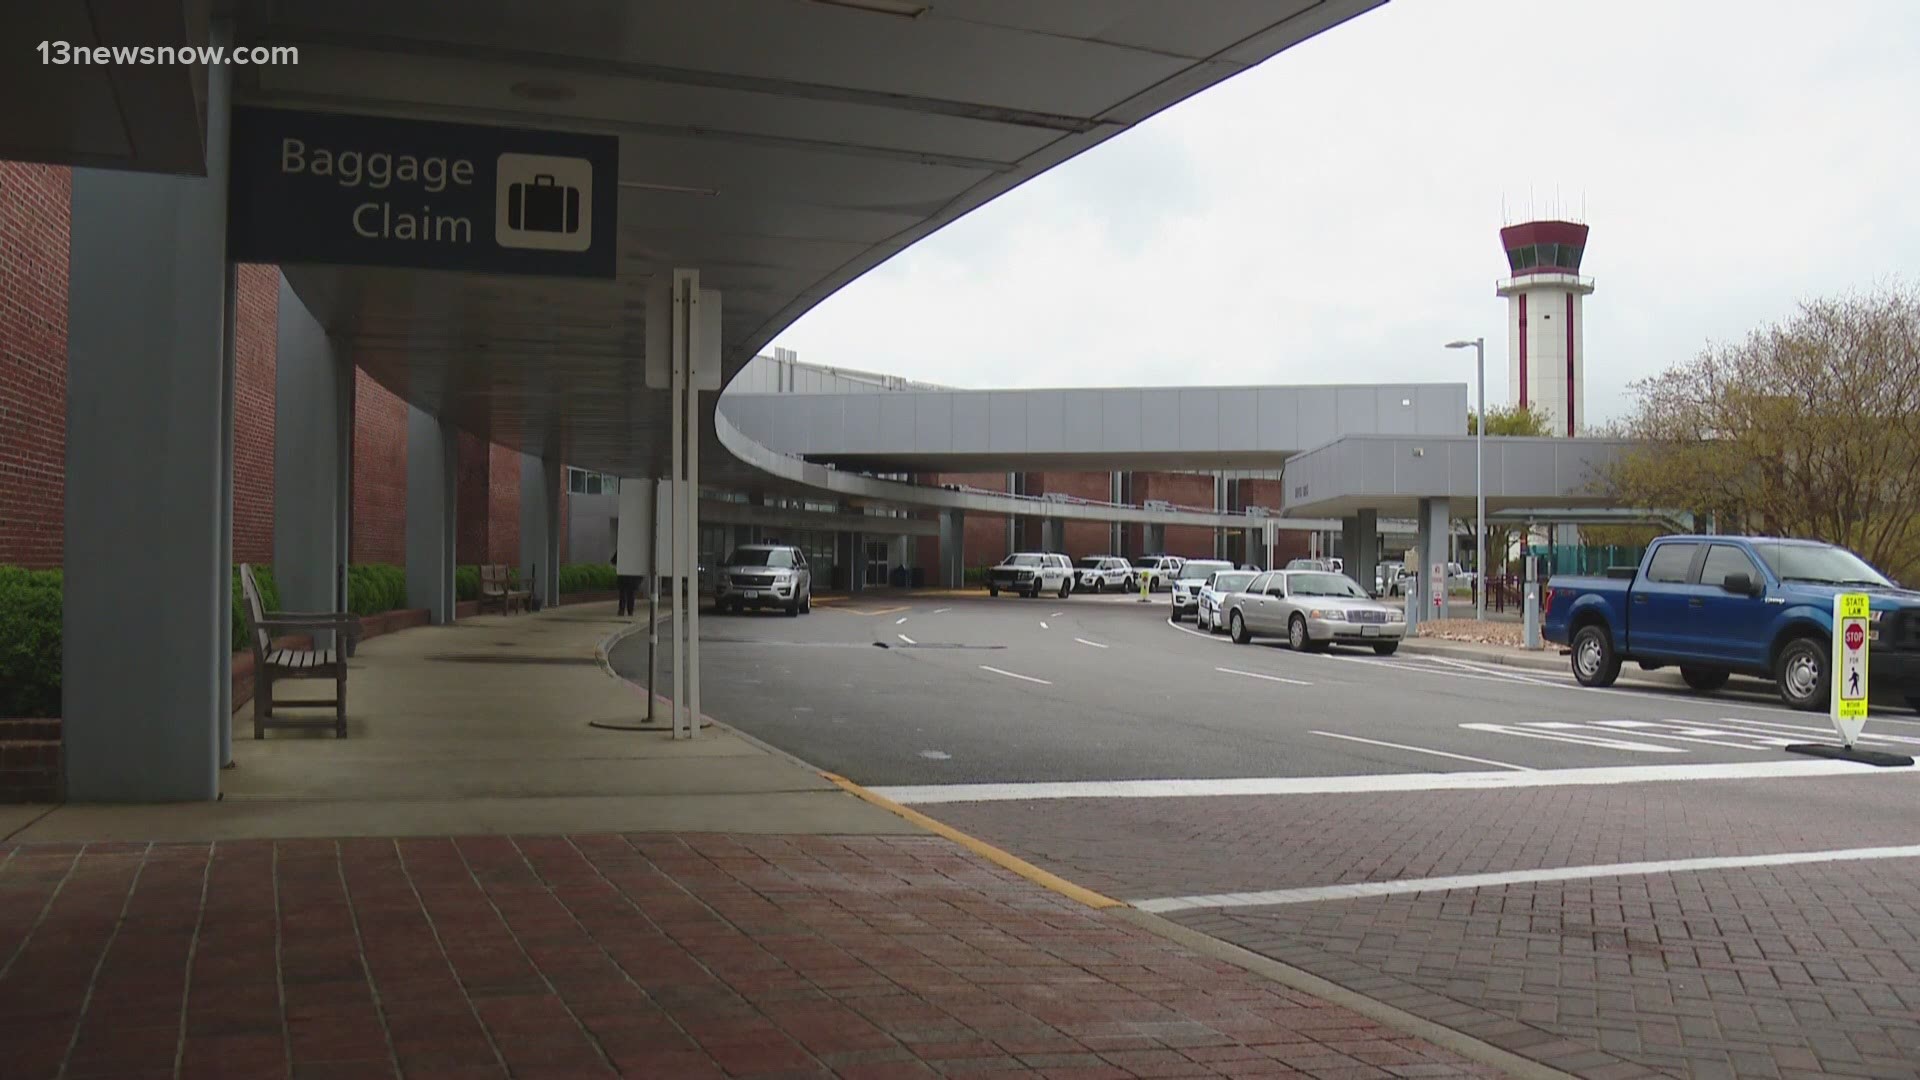 Members of the FBI as well as members of Virginia State Police and police departments from Hampton Roads were at the airport after a report of a bomb threat Thursday